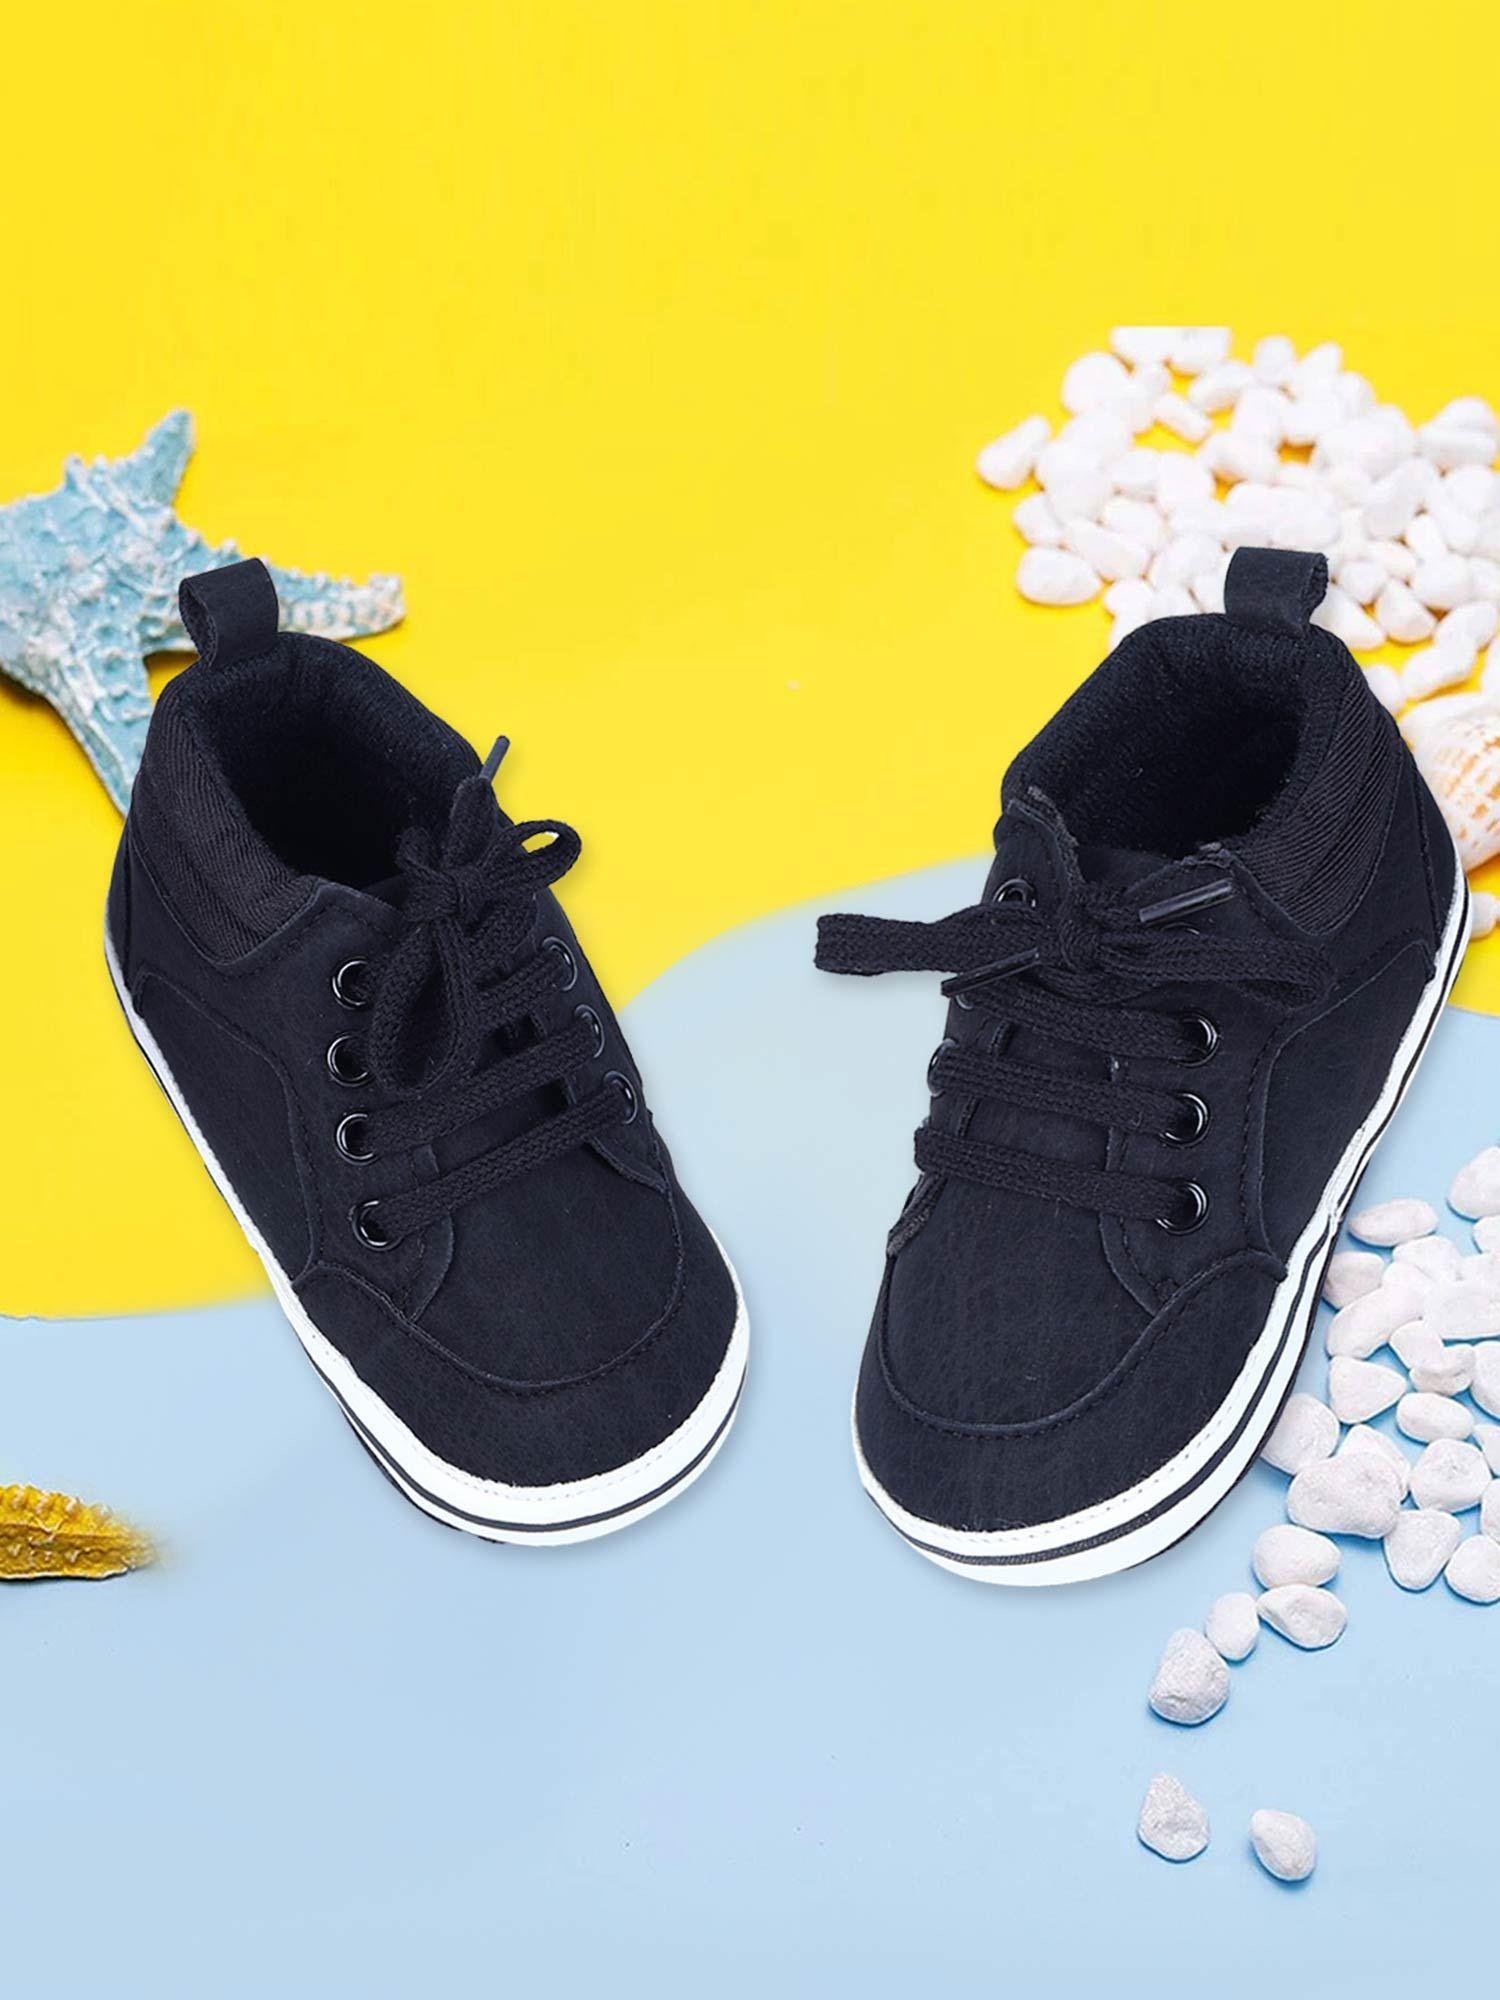 textured-leather-lace-up-stylish-kids-anti-slip-sneaker-shoes---black